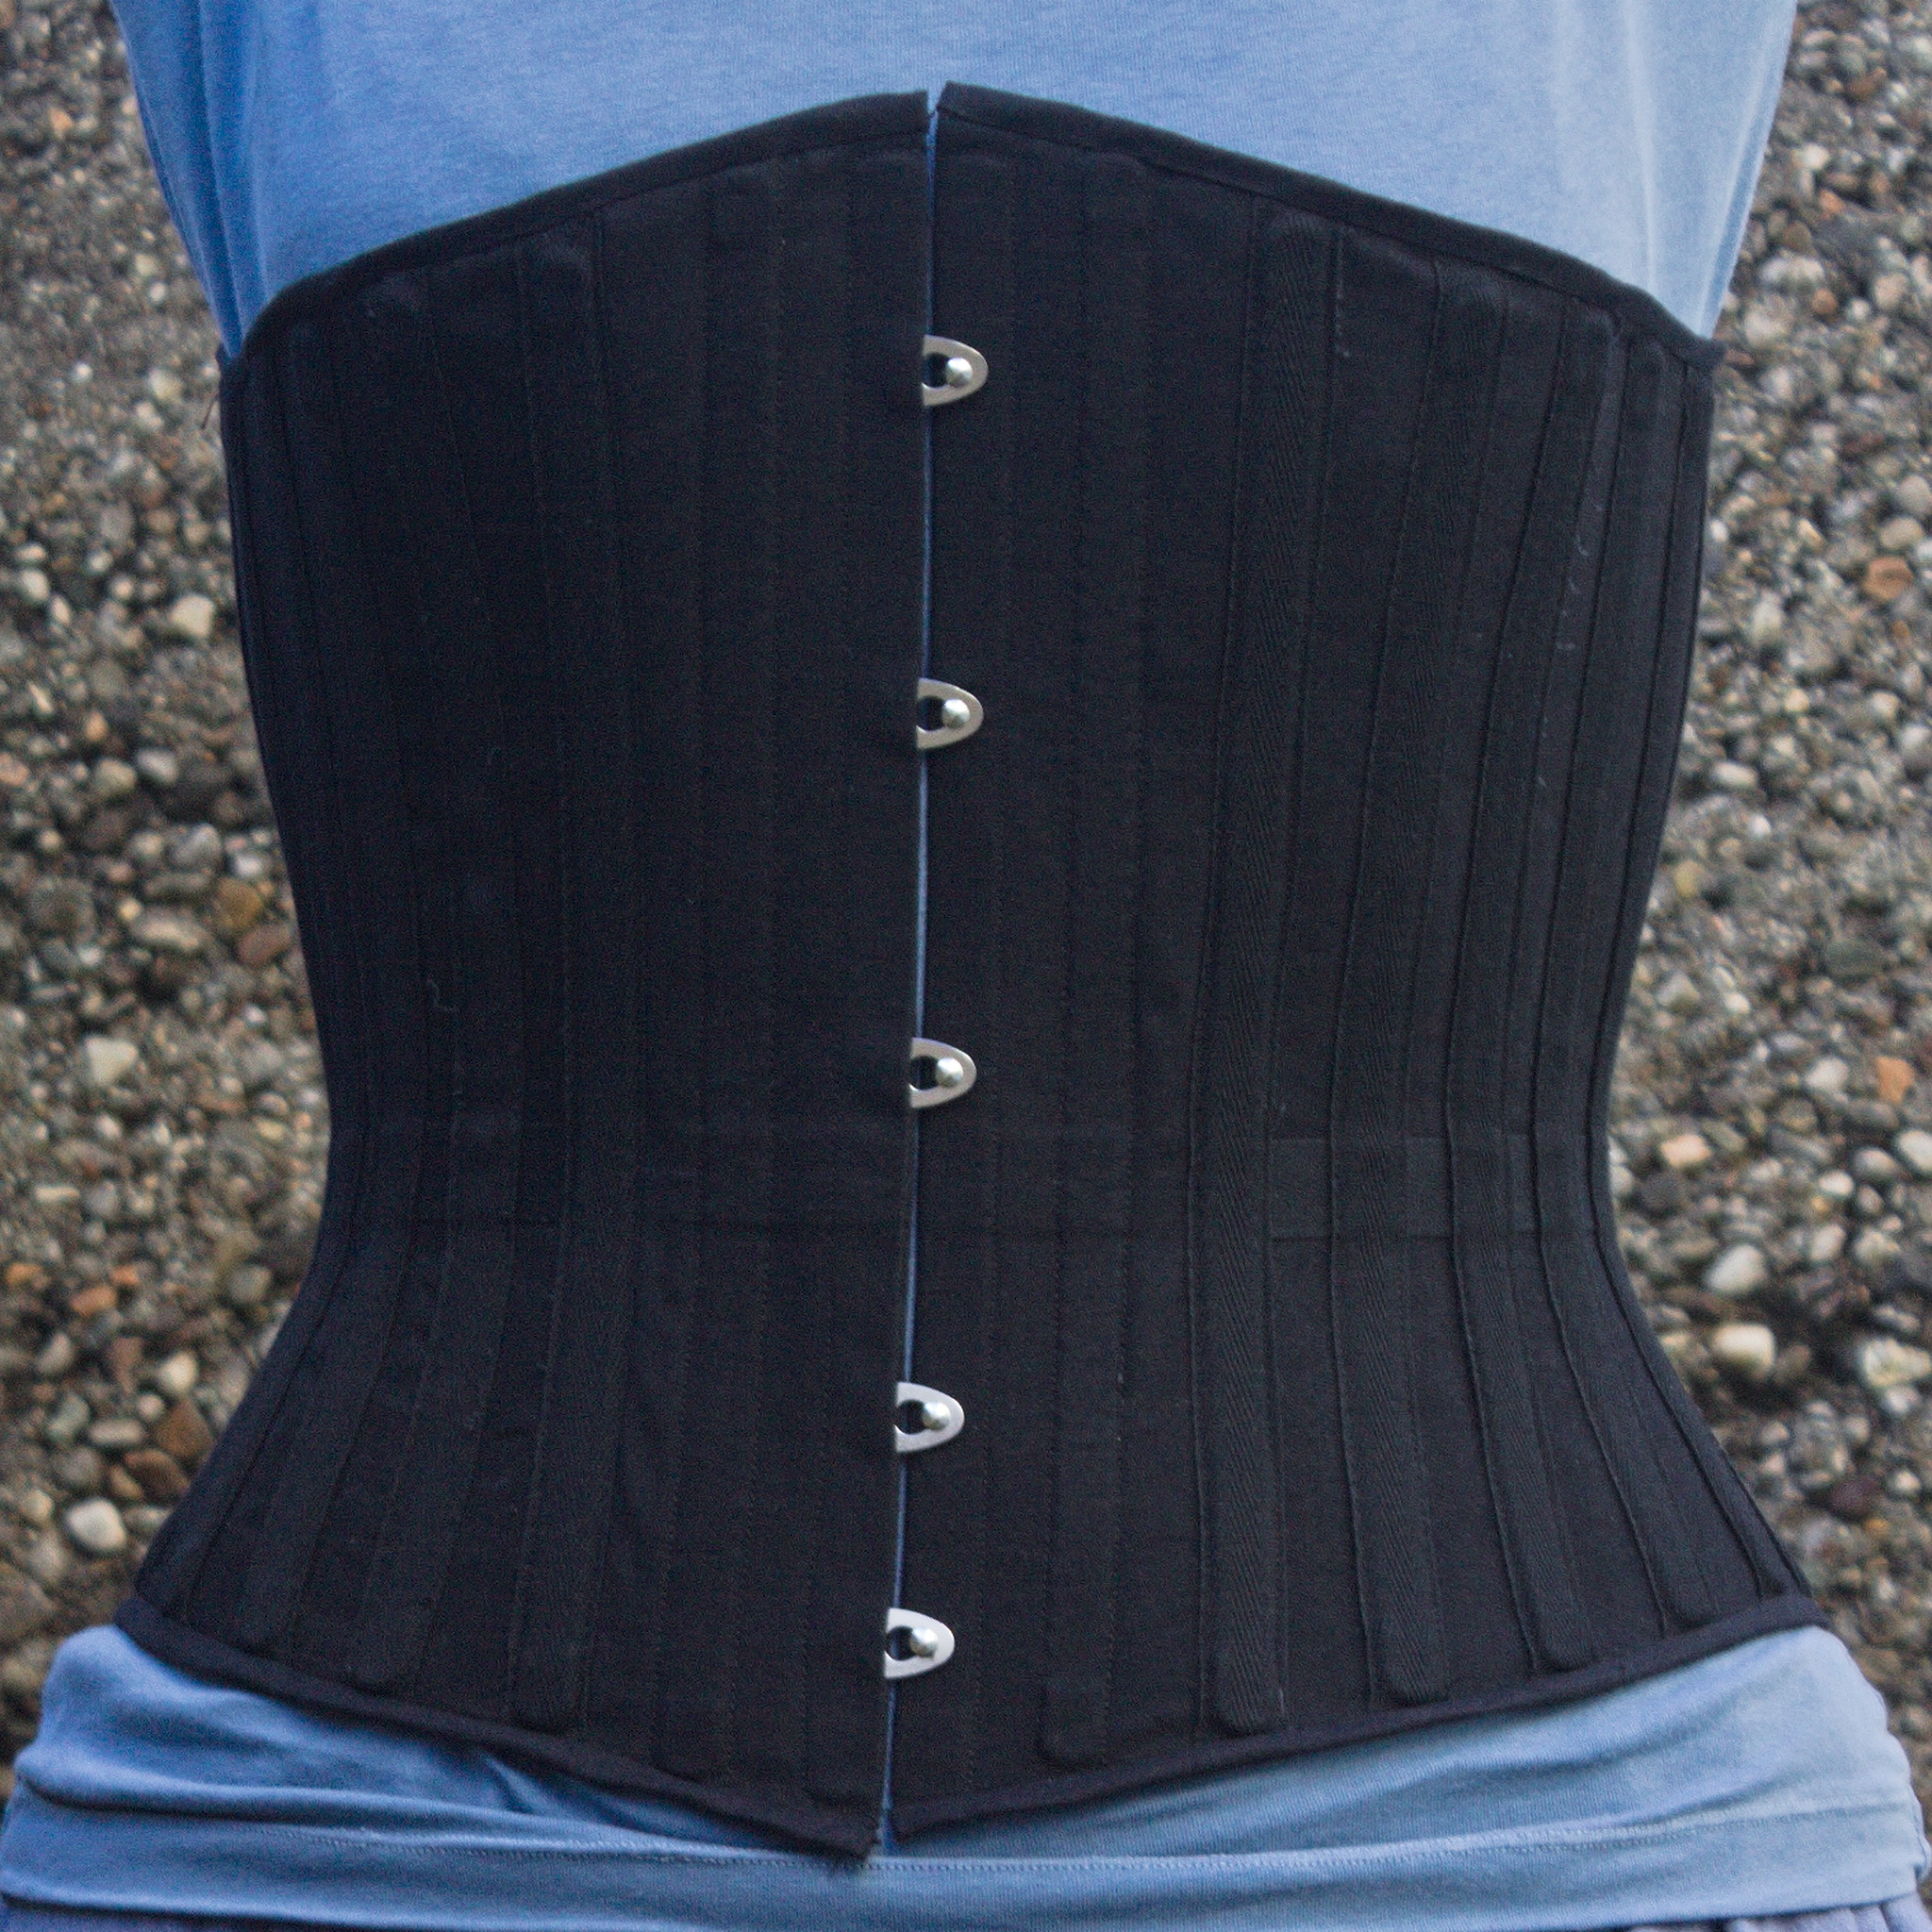 ../../../_images/corset_front.jpg